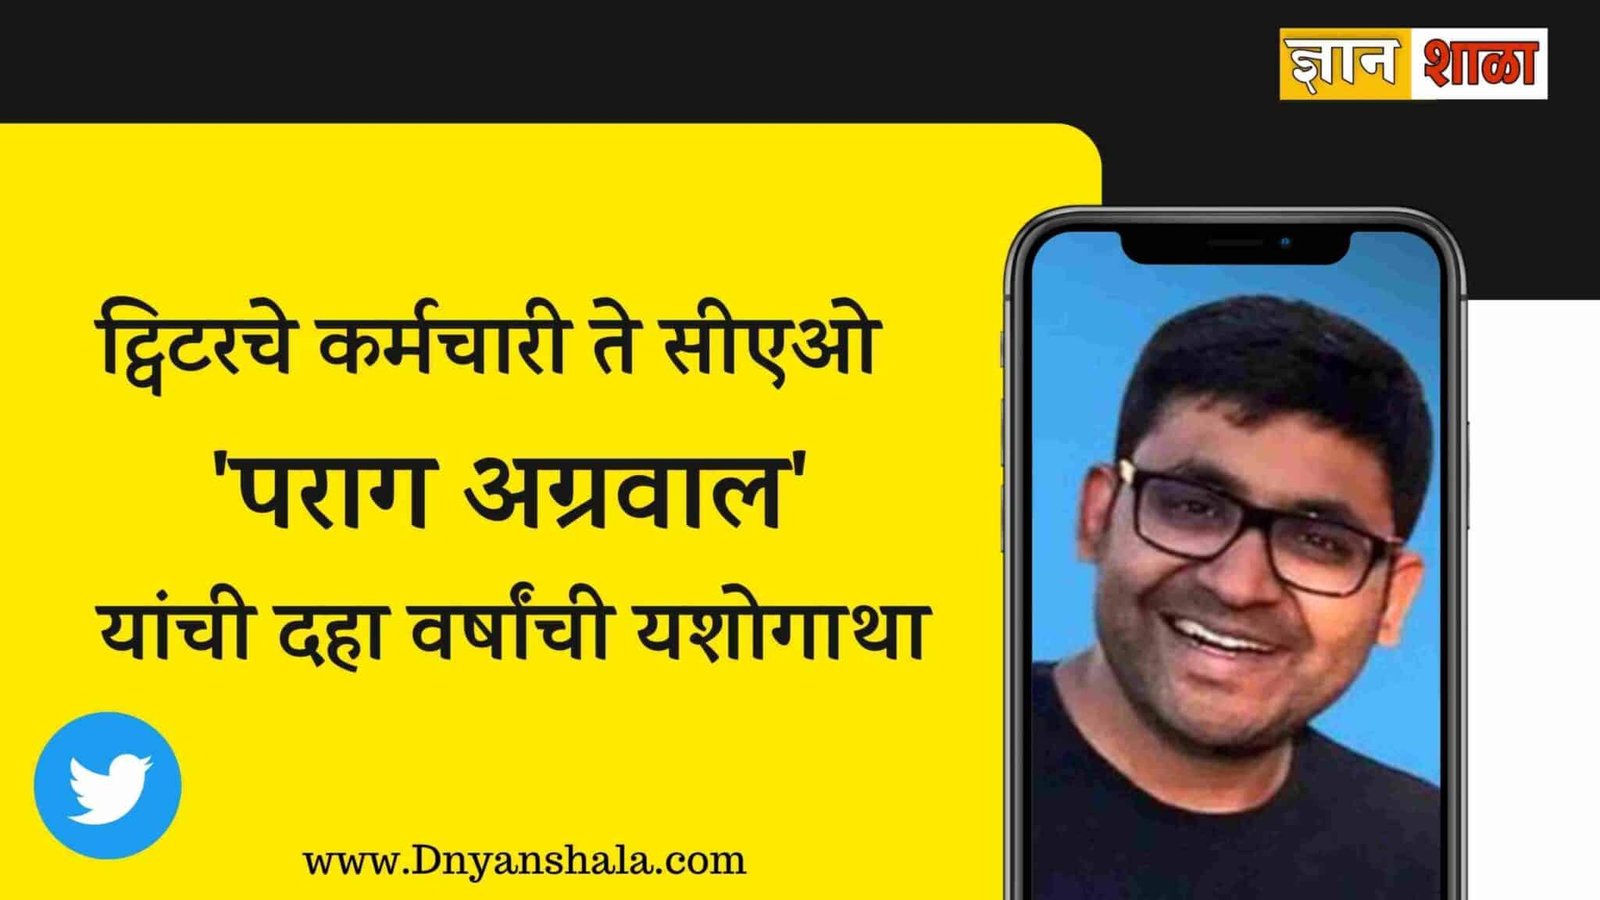 Success story of Parag Agrawal in marathi